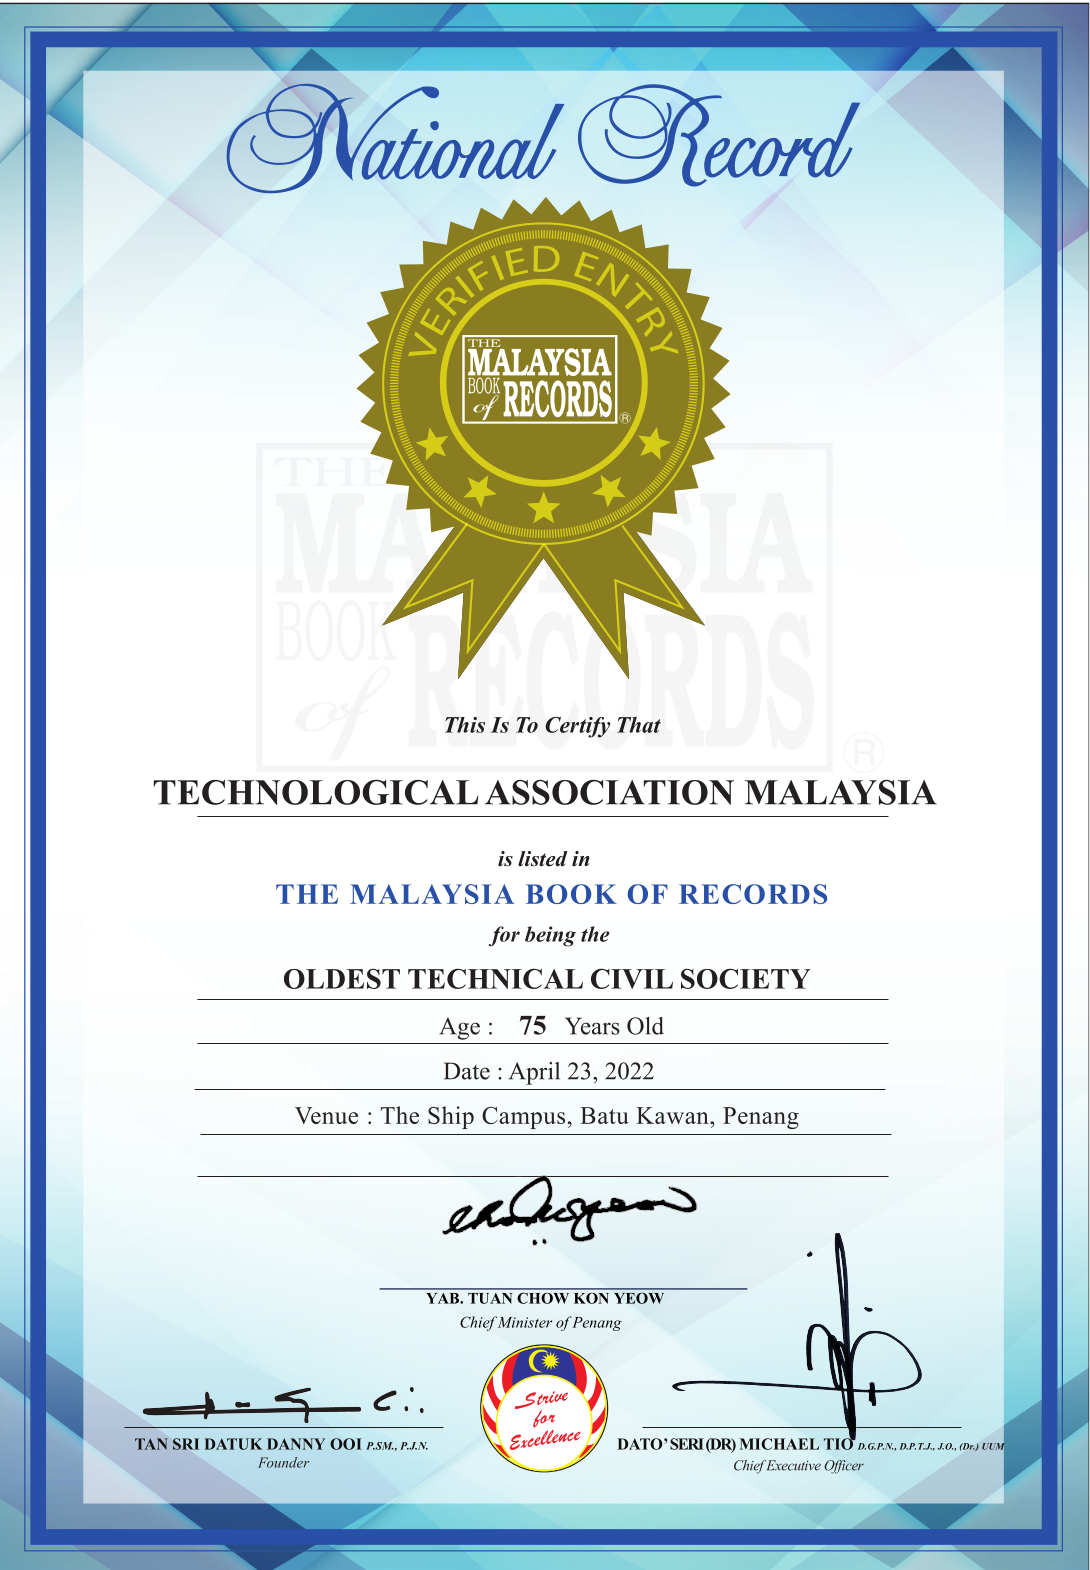 Malaysia Book of Records - the oldest technical civil society